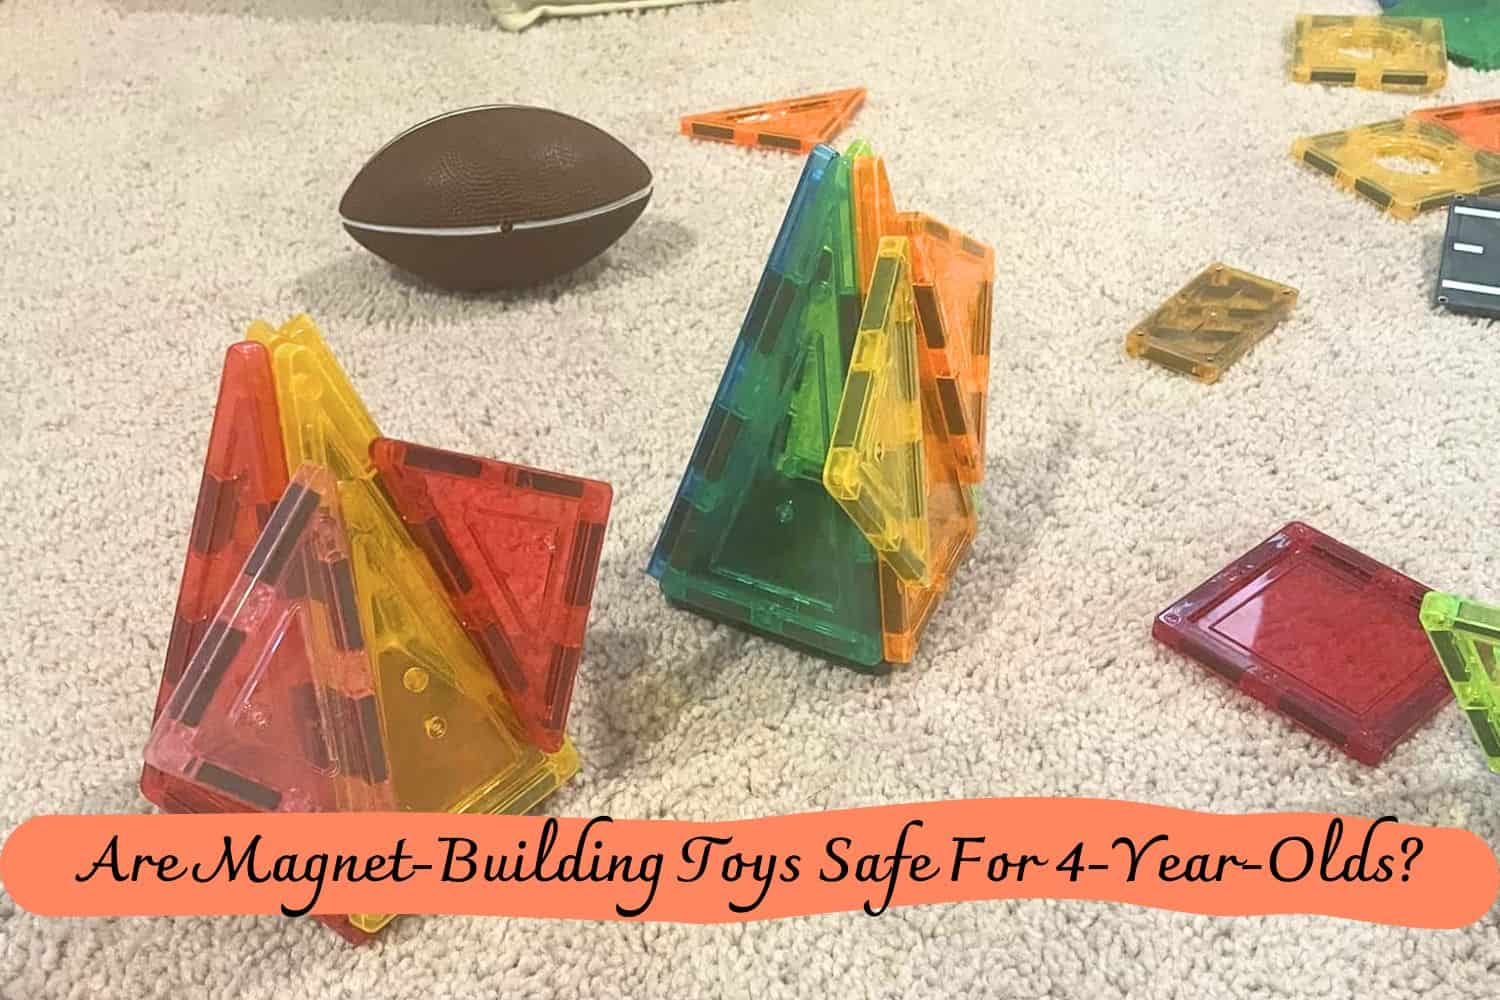 Are Magnet-Building Toys Safe For 4-Year-Olds